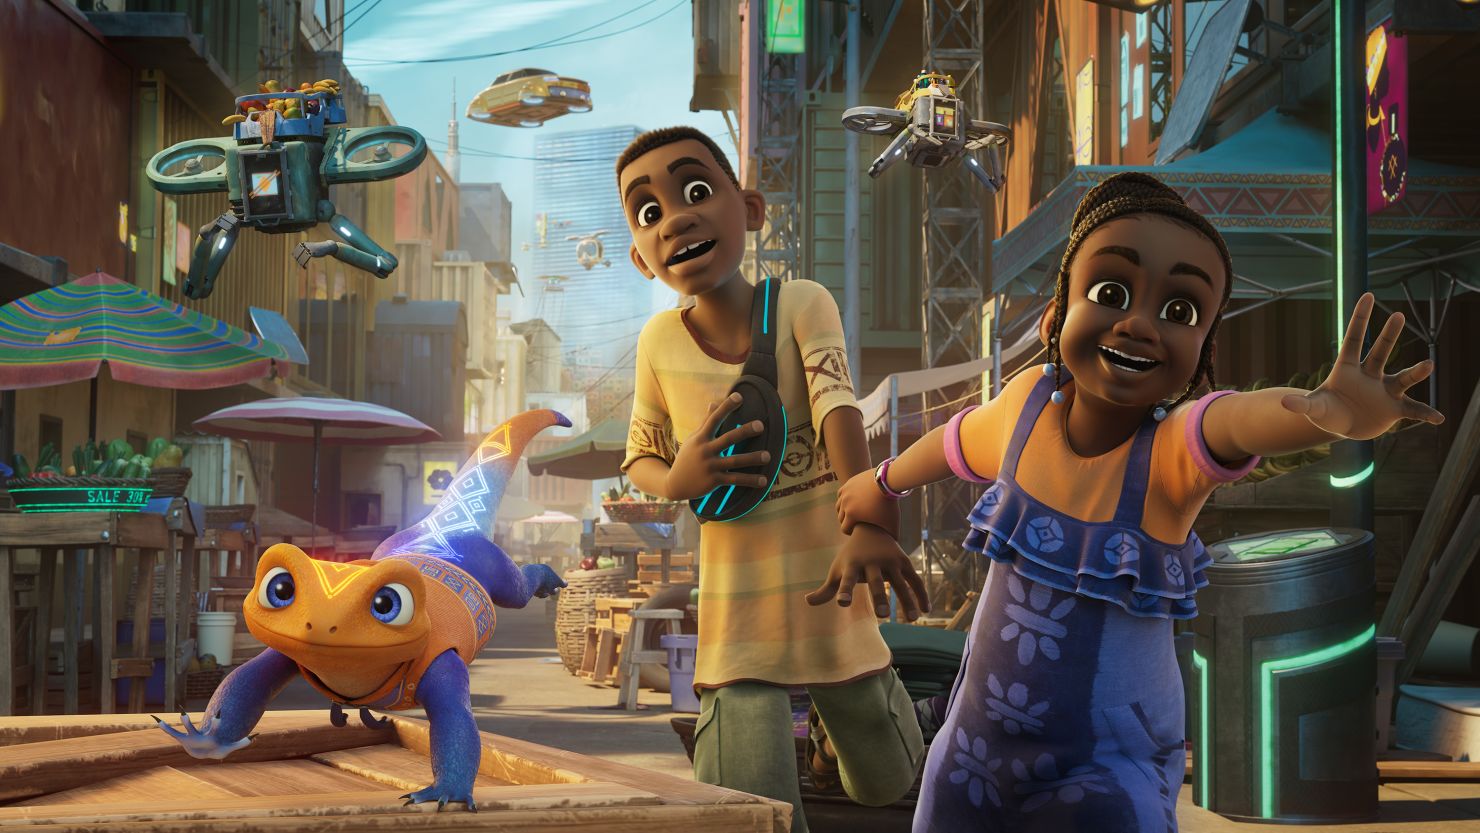 "Iwájú" is an animated coming-of-age story set in a futuristic Lagos, featuring Tola (right) and her best friend Kole (center), voiced by Nigerian actors Simisola Gbadamosi and Siji Soetan.